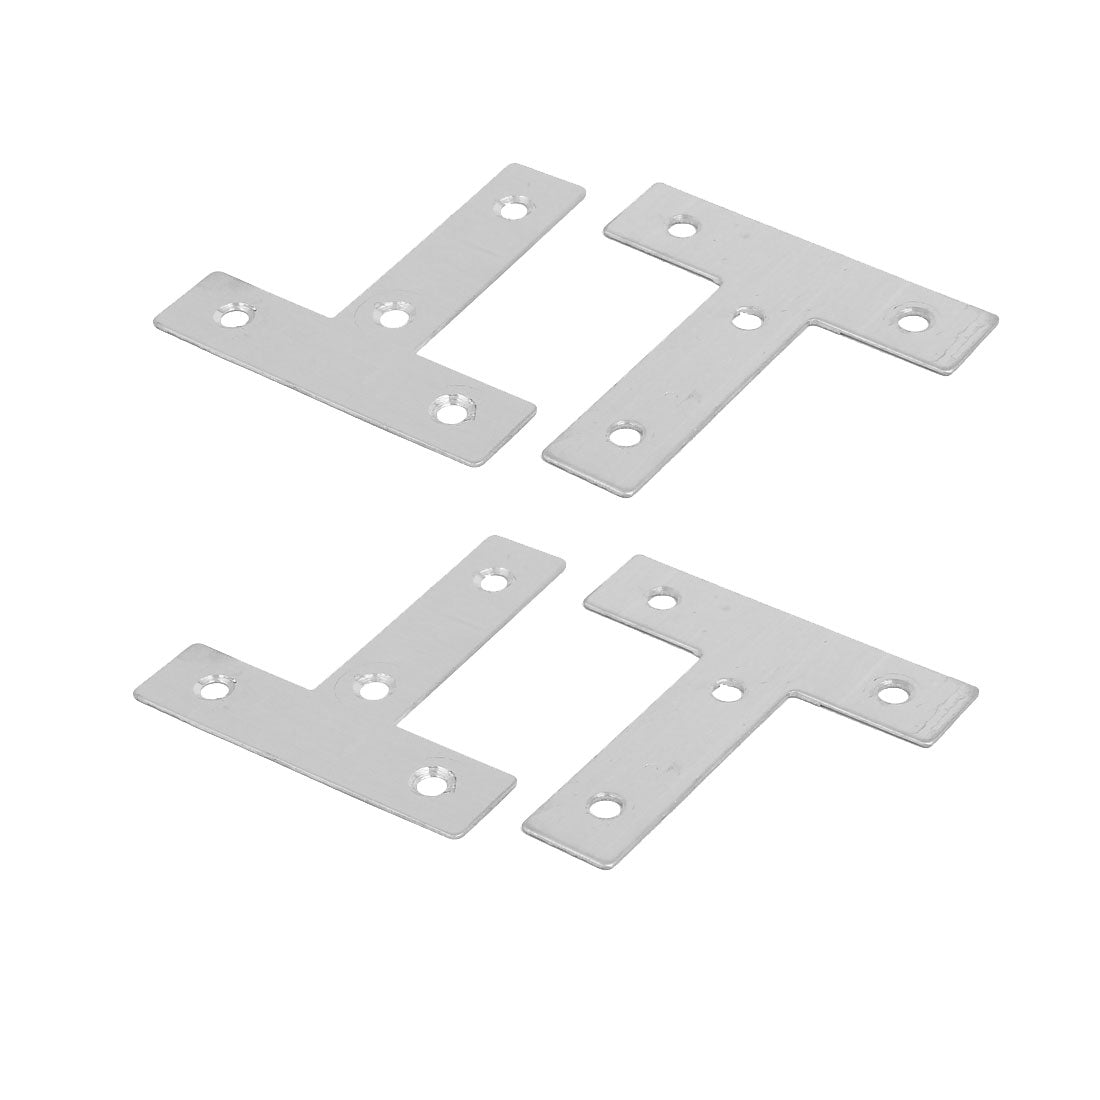 uxcell Uxcell 60mmx60mmx1mm Stainless Steel Flat T Shaped Corner Brace Repair Plates 4pcs